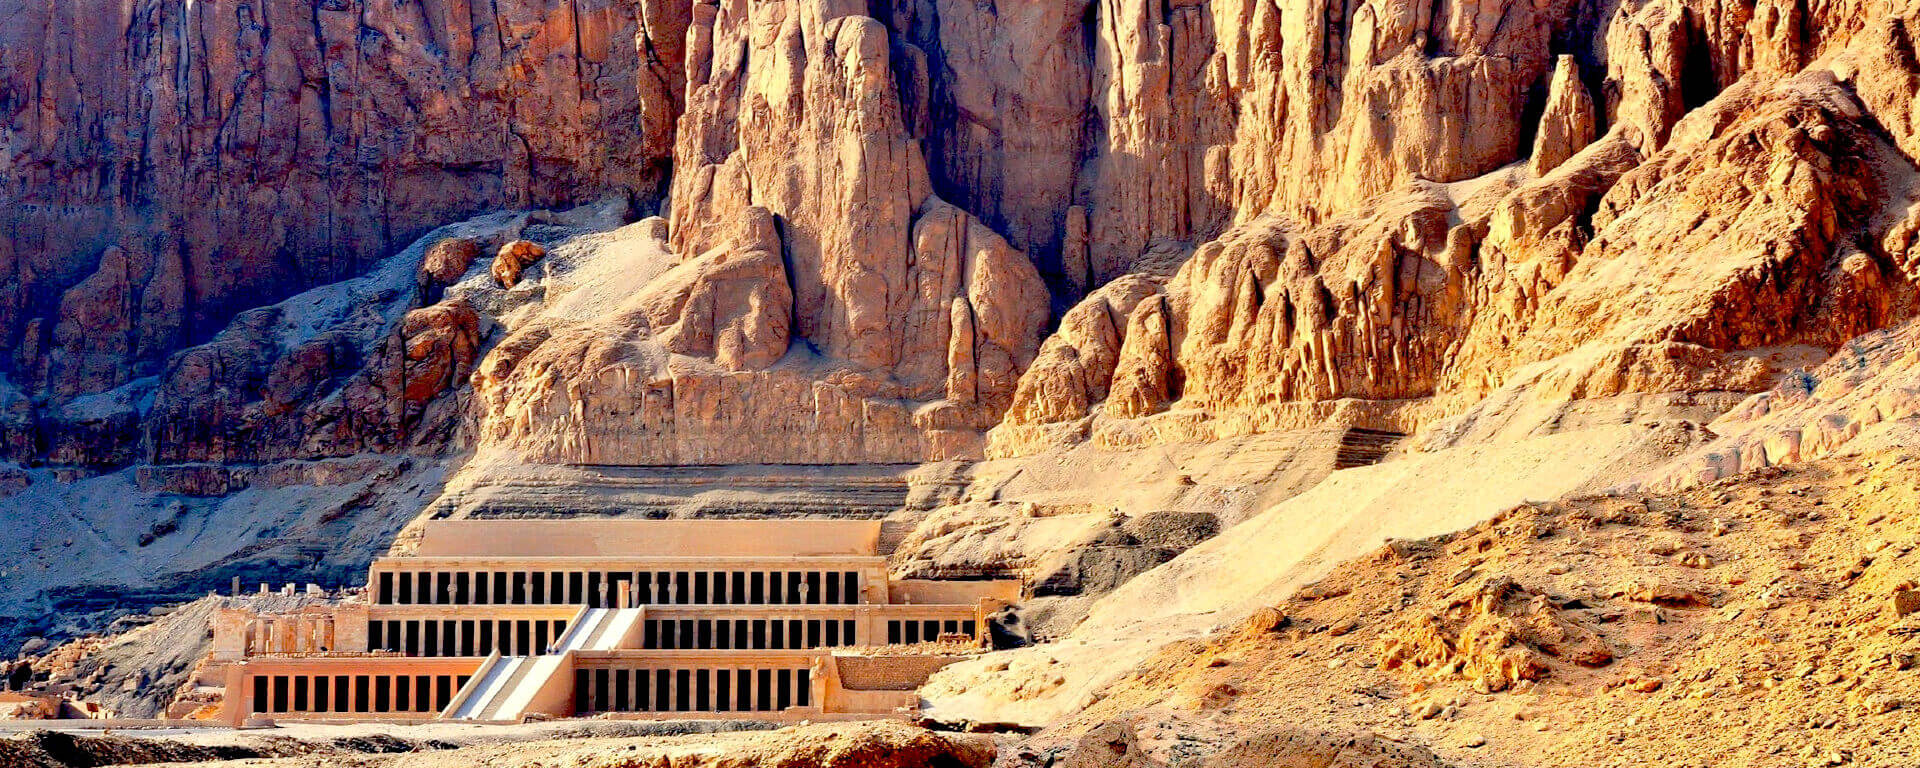 Luxor Tour Packages